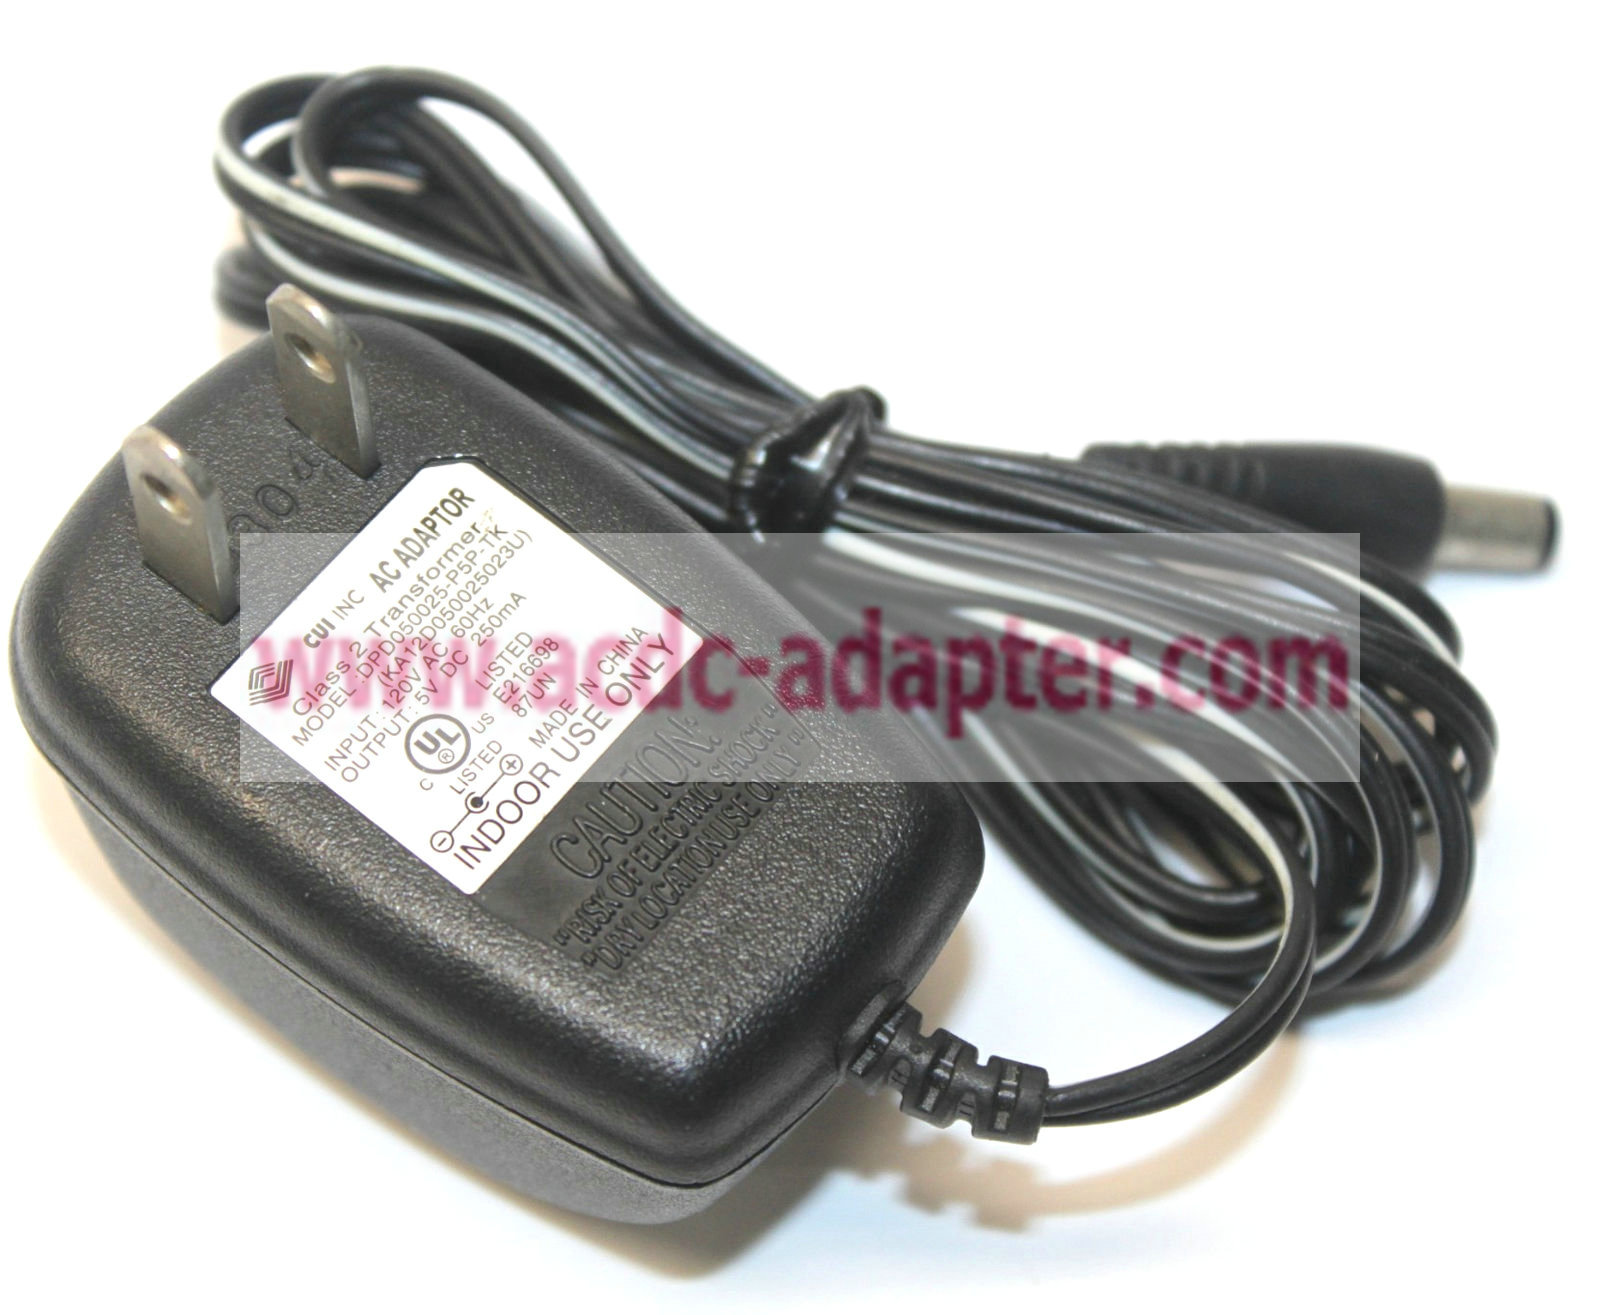 New CUI DPD050025-P5P-TK(KA12D050025023U) 5V 250mA AC Adapter Plug-In Charger Powe